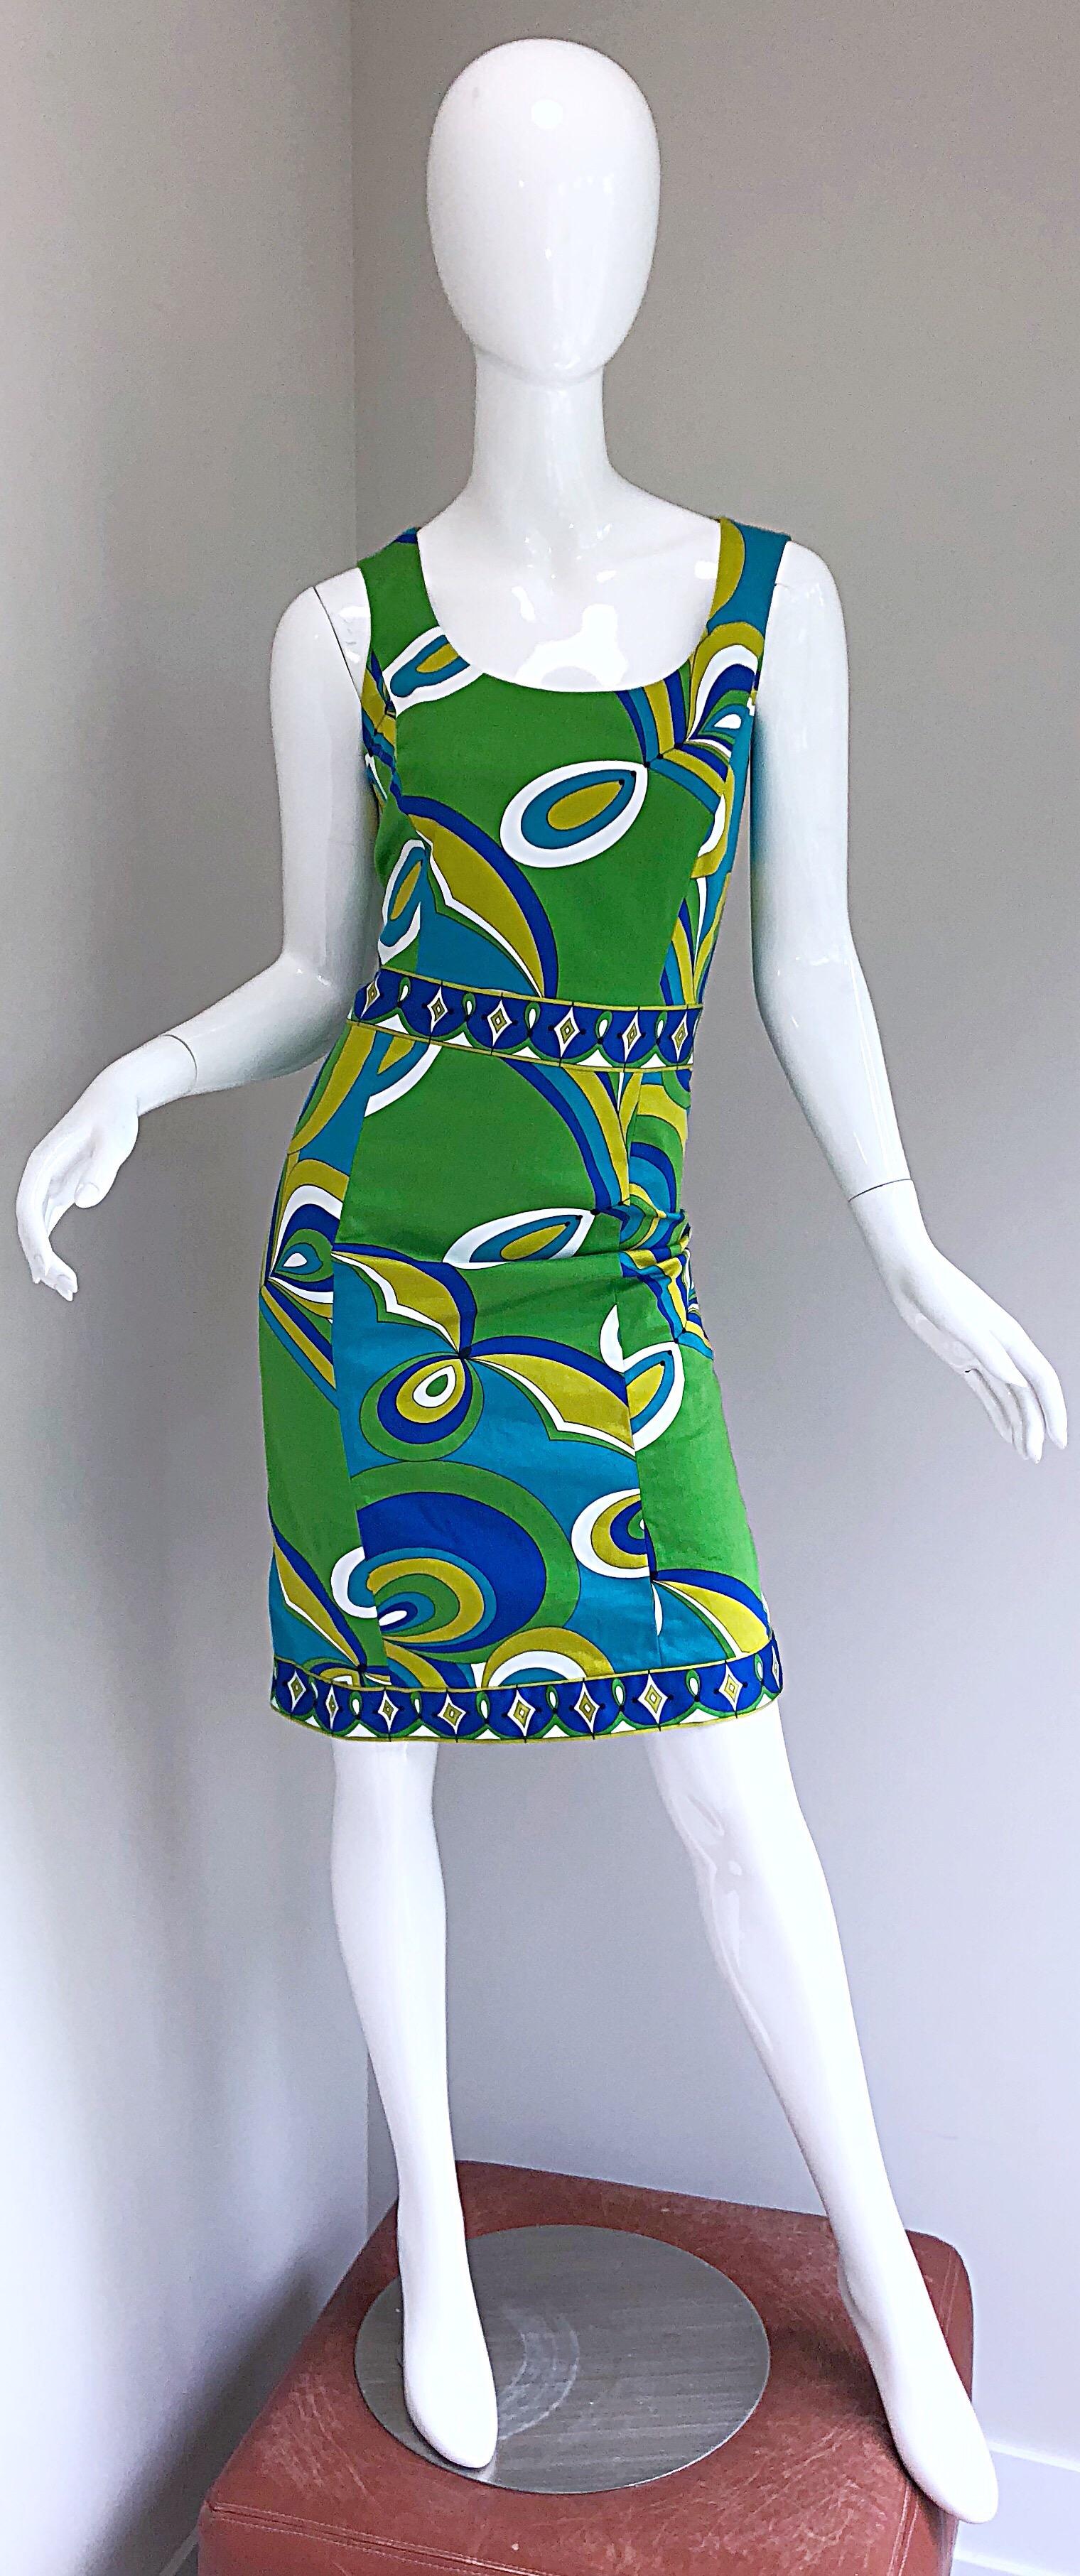 Chic 90s does 60s HARVE BENARD vintage mod sheath dress! Features an Emilio Pucci styled kaleidoscope print in vibrant colors of green, chartreuse, turquoise blue, royal blue and white throughout. Stretch Cotton (97%) and Spandex (3%) is both